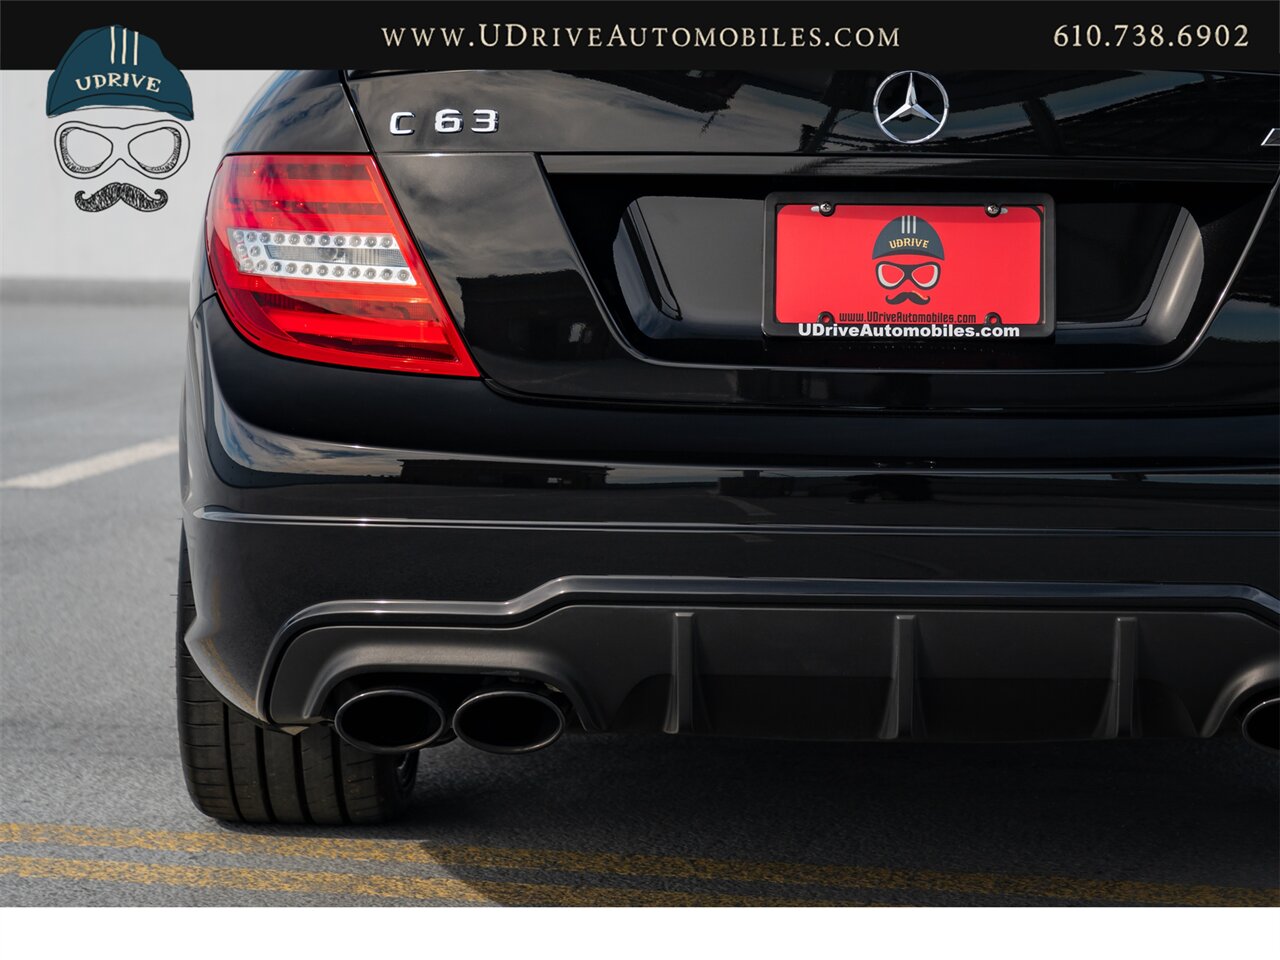 2015 Mercedes-Benz C63 AMG  Edition 507 17k Miles Pano Sunroof Locking Diff 507hp - Photo 22 - West Chester, PA 19382